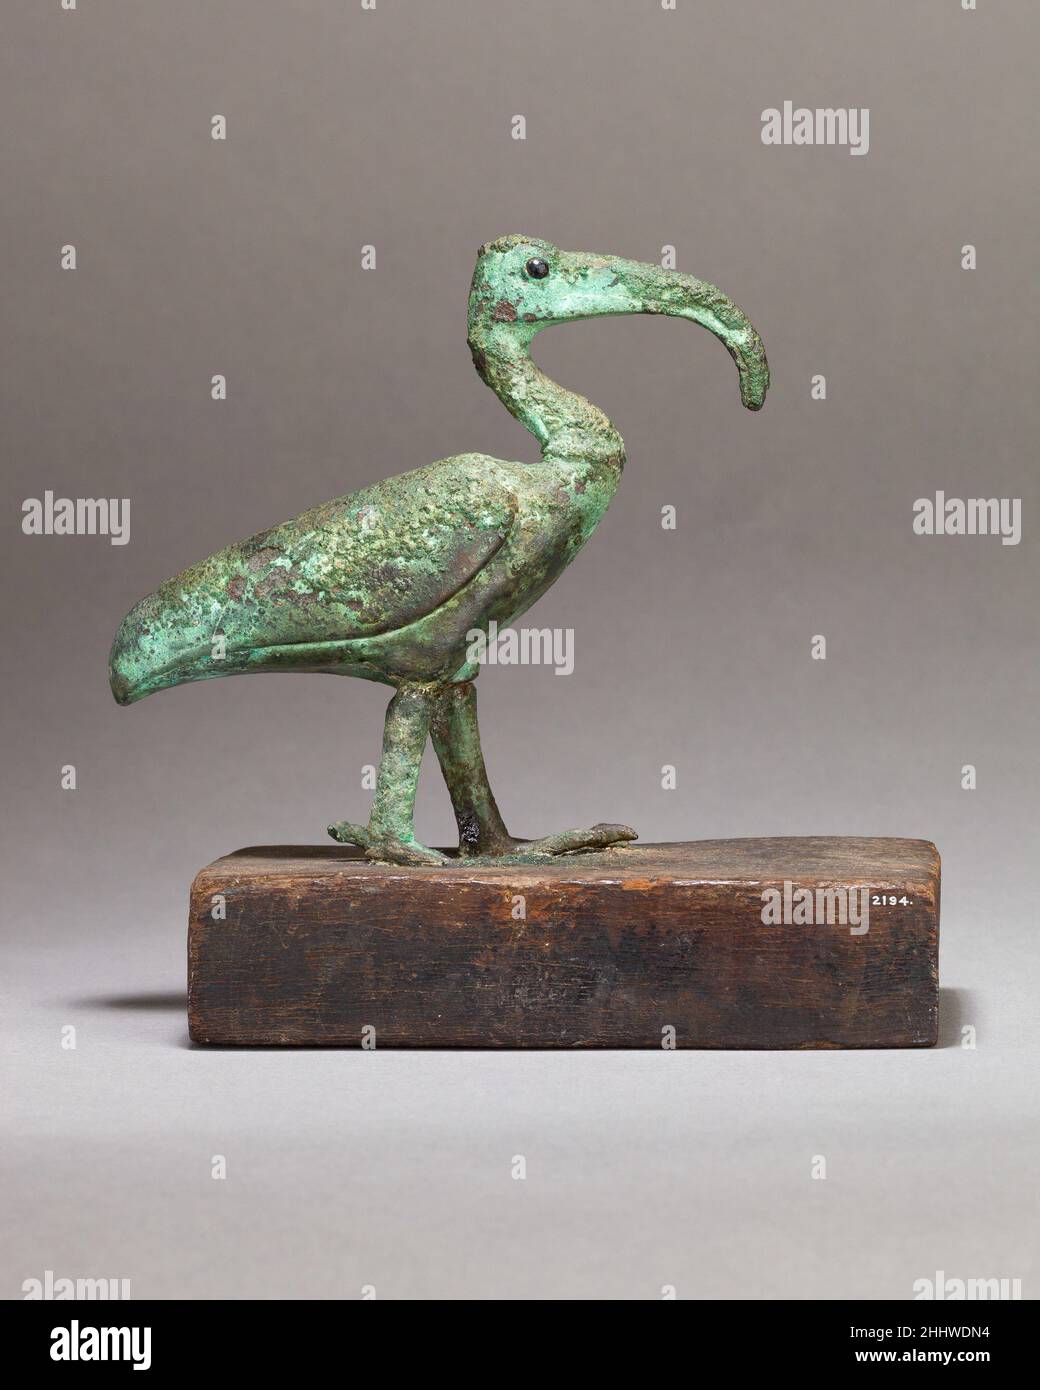 Ibis on a wooden base 664–30 B.C. Late Period–Ptolemaic Period This ibis has a fine head, and stands on an ancient wooden base also appears unusual. Two mortises on the underside indicate the base was reused anciently, probably from a striding god to judge from the placement of the mortises.. Ibis on a wooden base  552995 Stock Photo